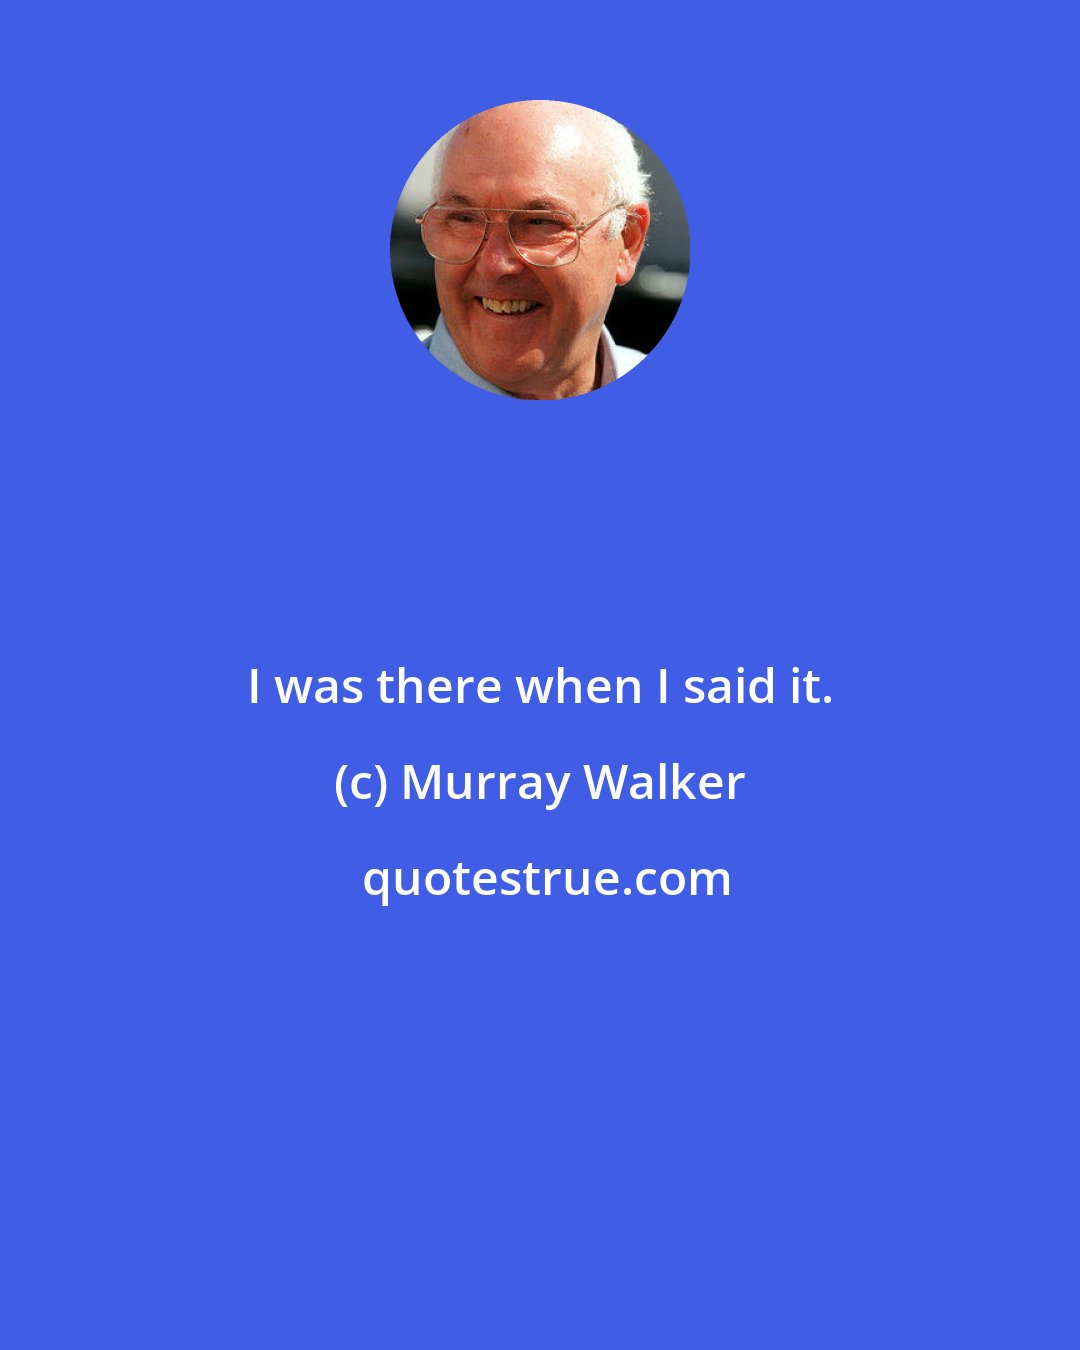 Murray Walker: I was there when I said it.